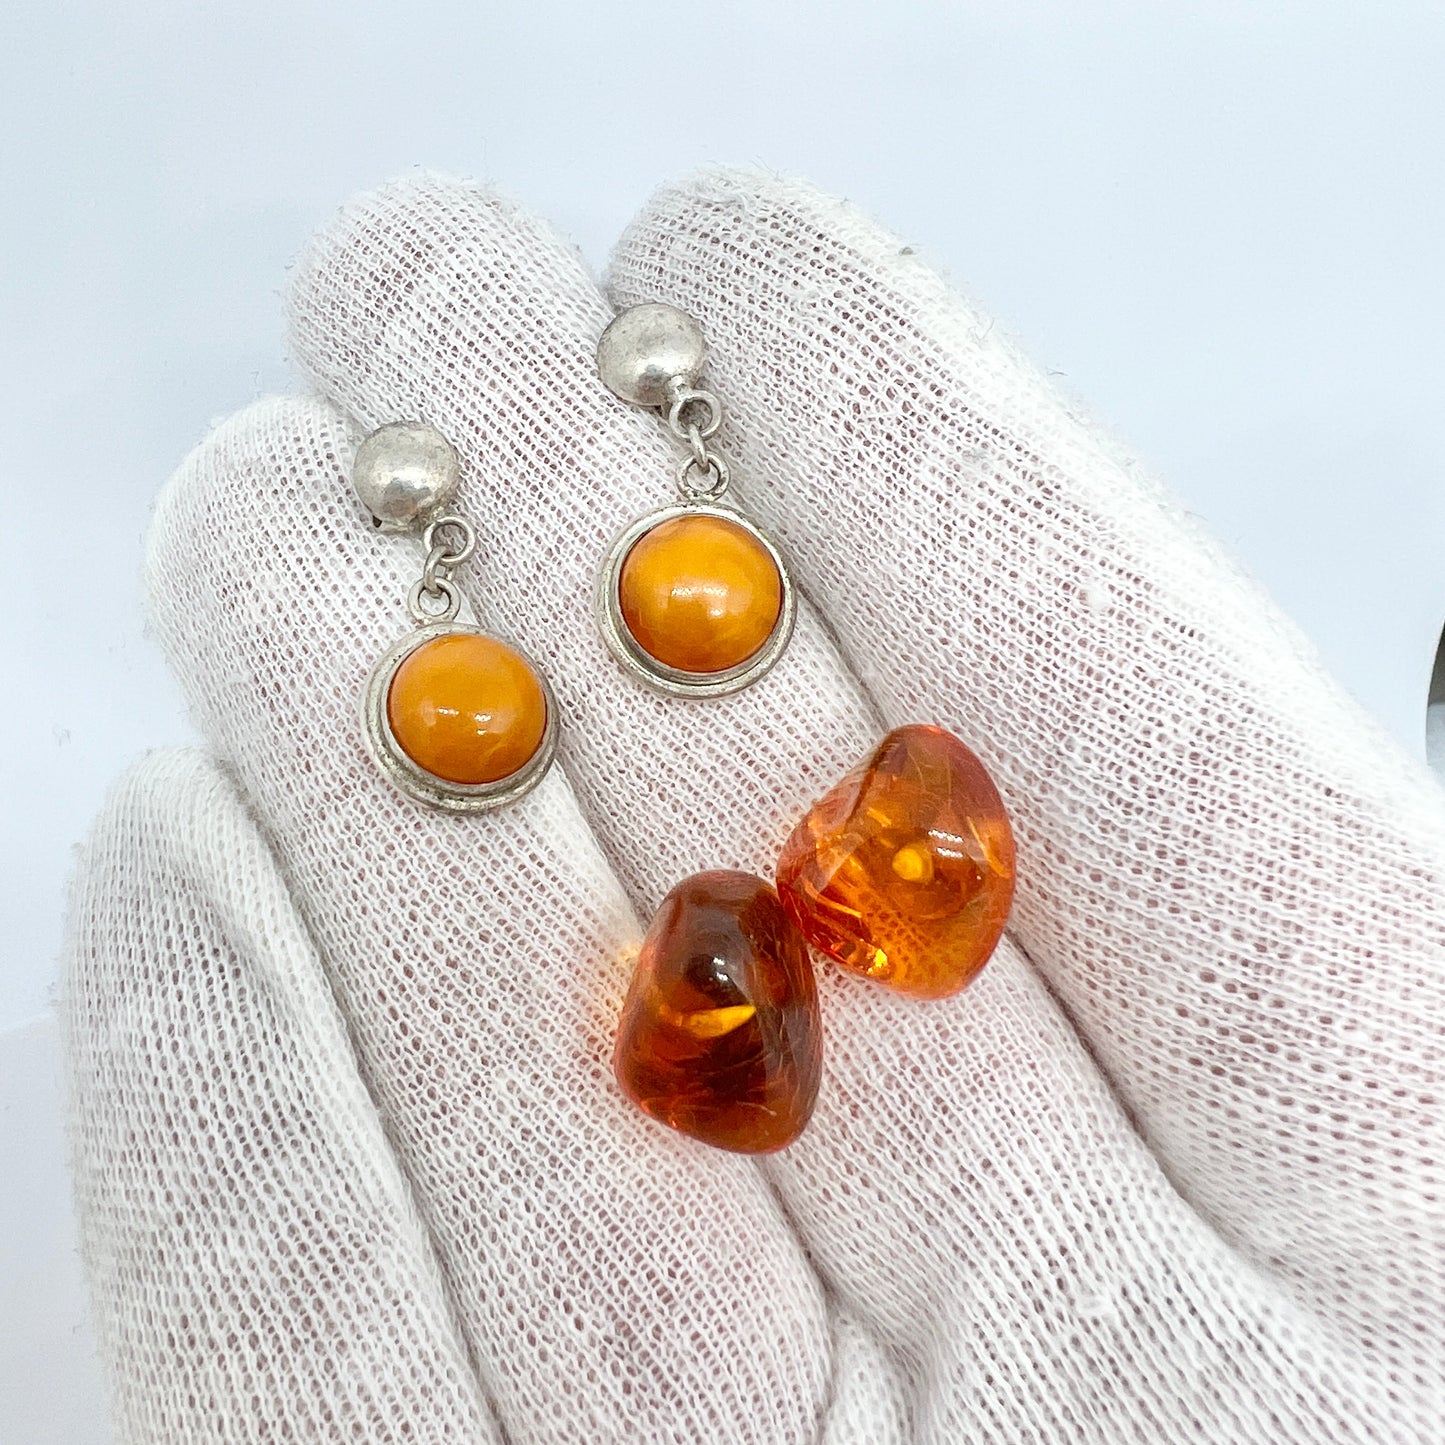 Poland. Vintage Solid Silver Baltic Amber Earrings.